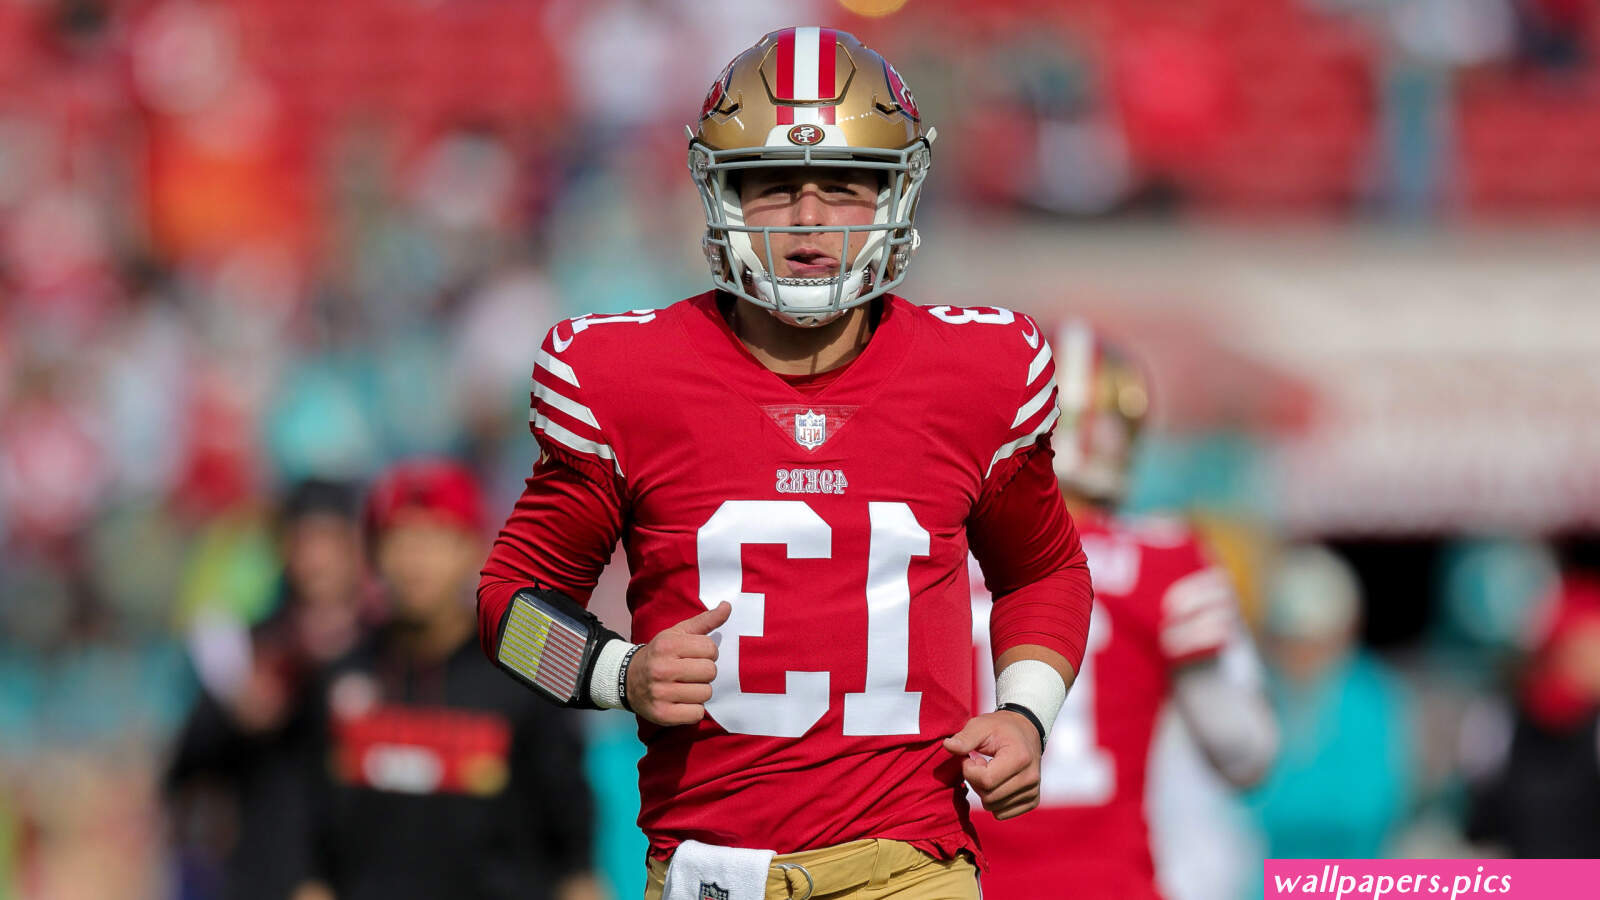 Can San Francisco 49ers Win Super Bowl With Brock Purdy?